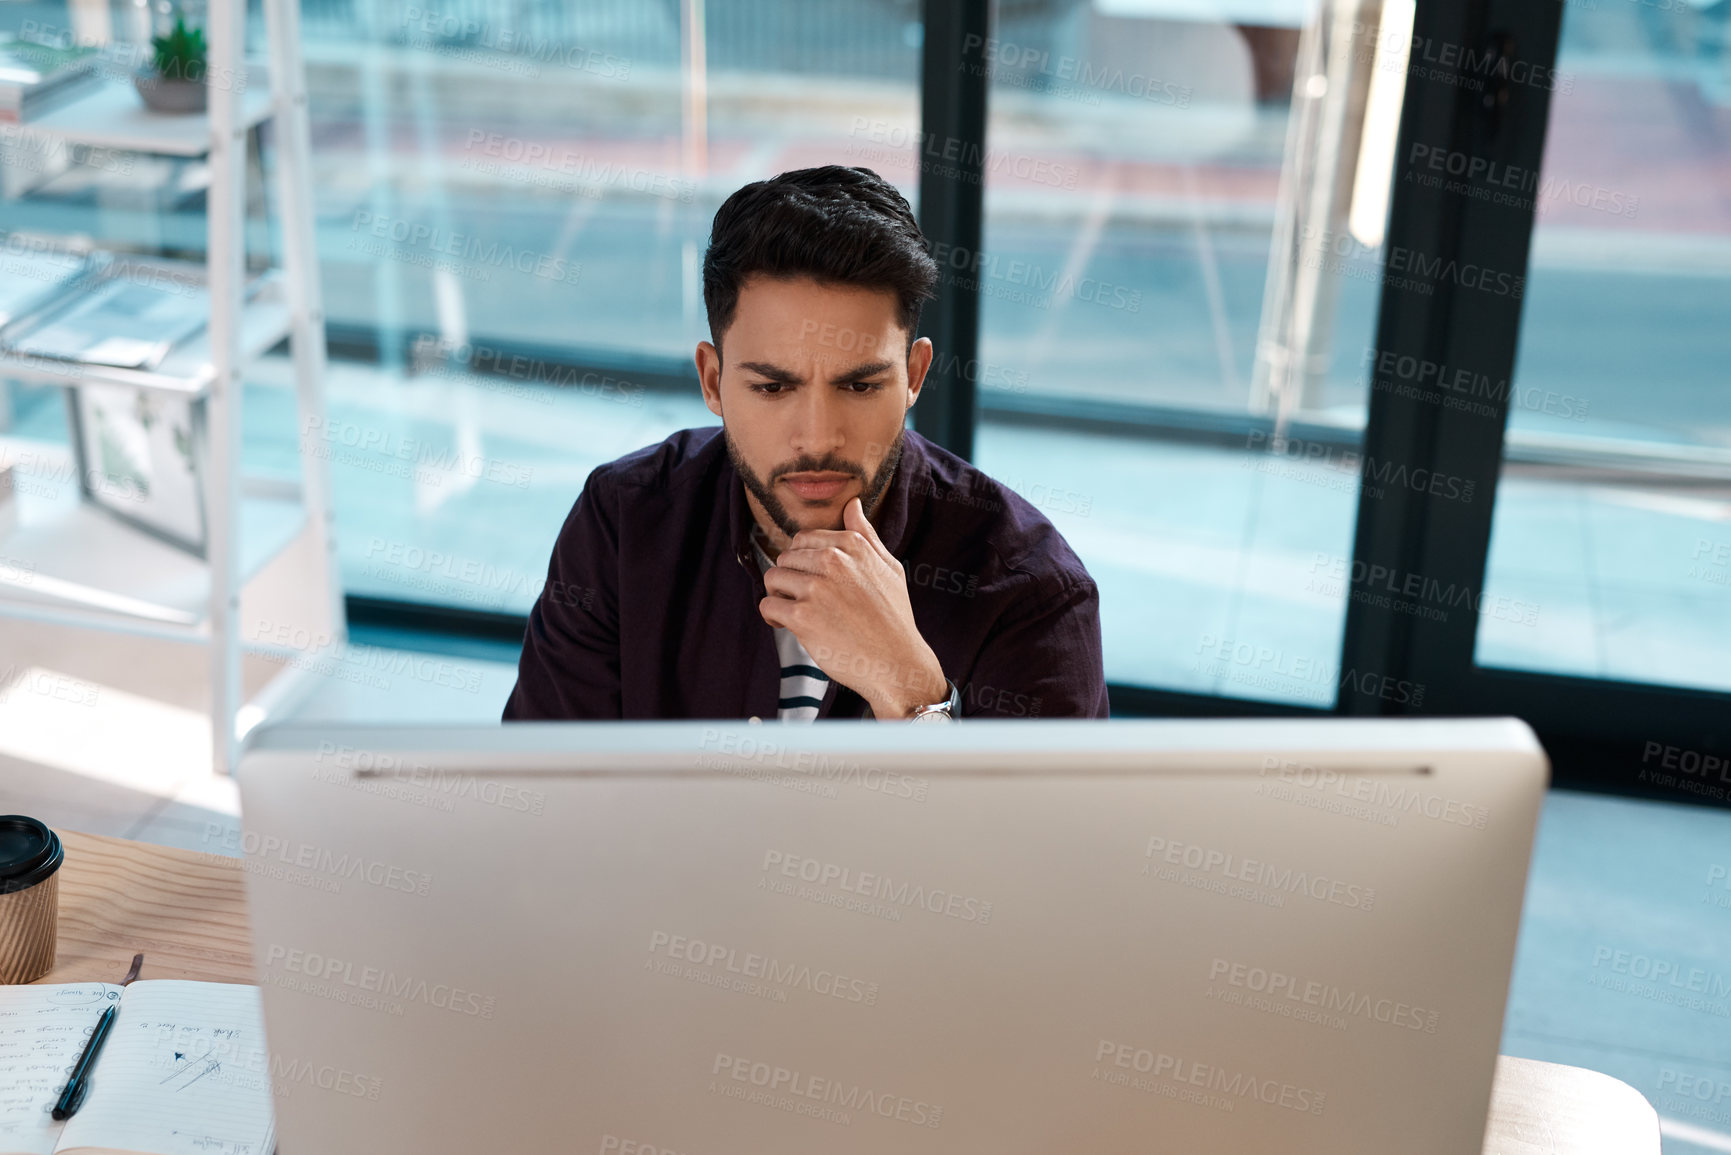 Buy stock photo Serious, computer and a business man thinking while working at a desk and online for research. Male entrepreneur person confused while reading email or data analytics with internet connection